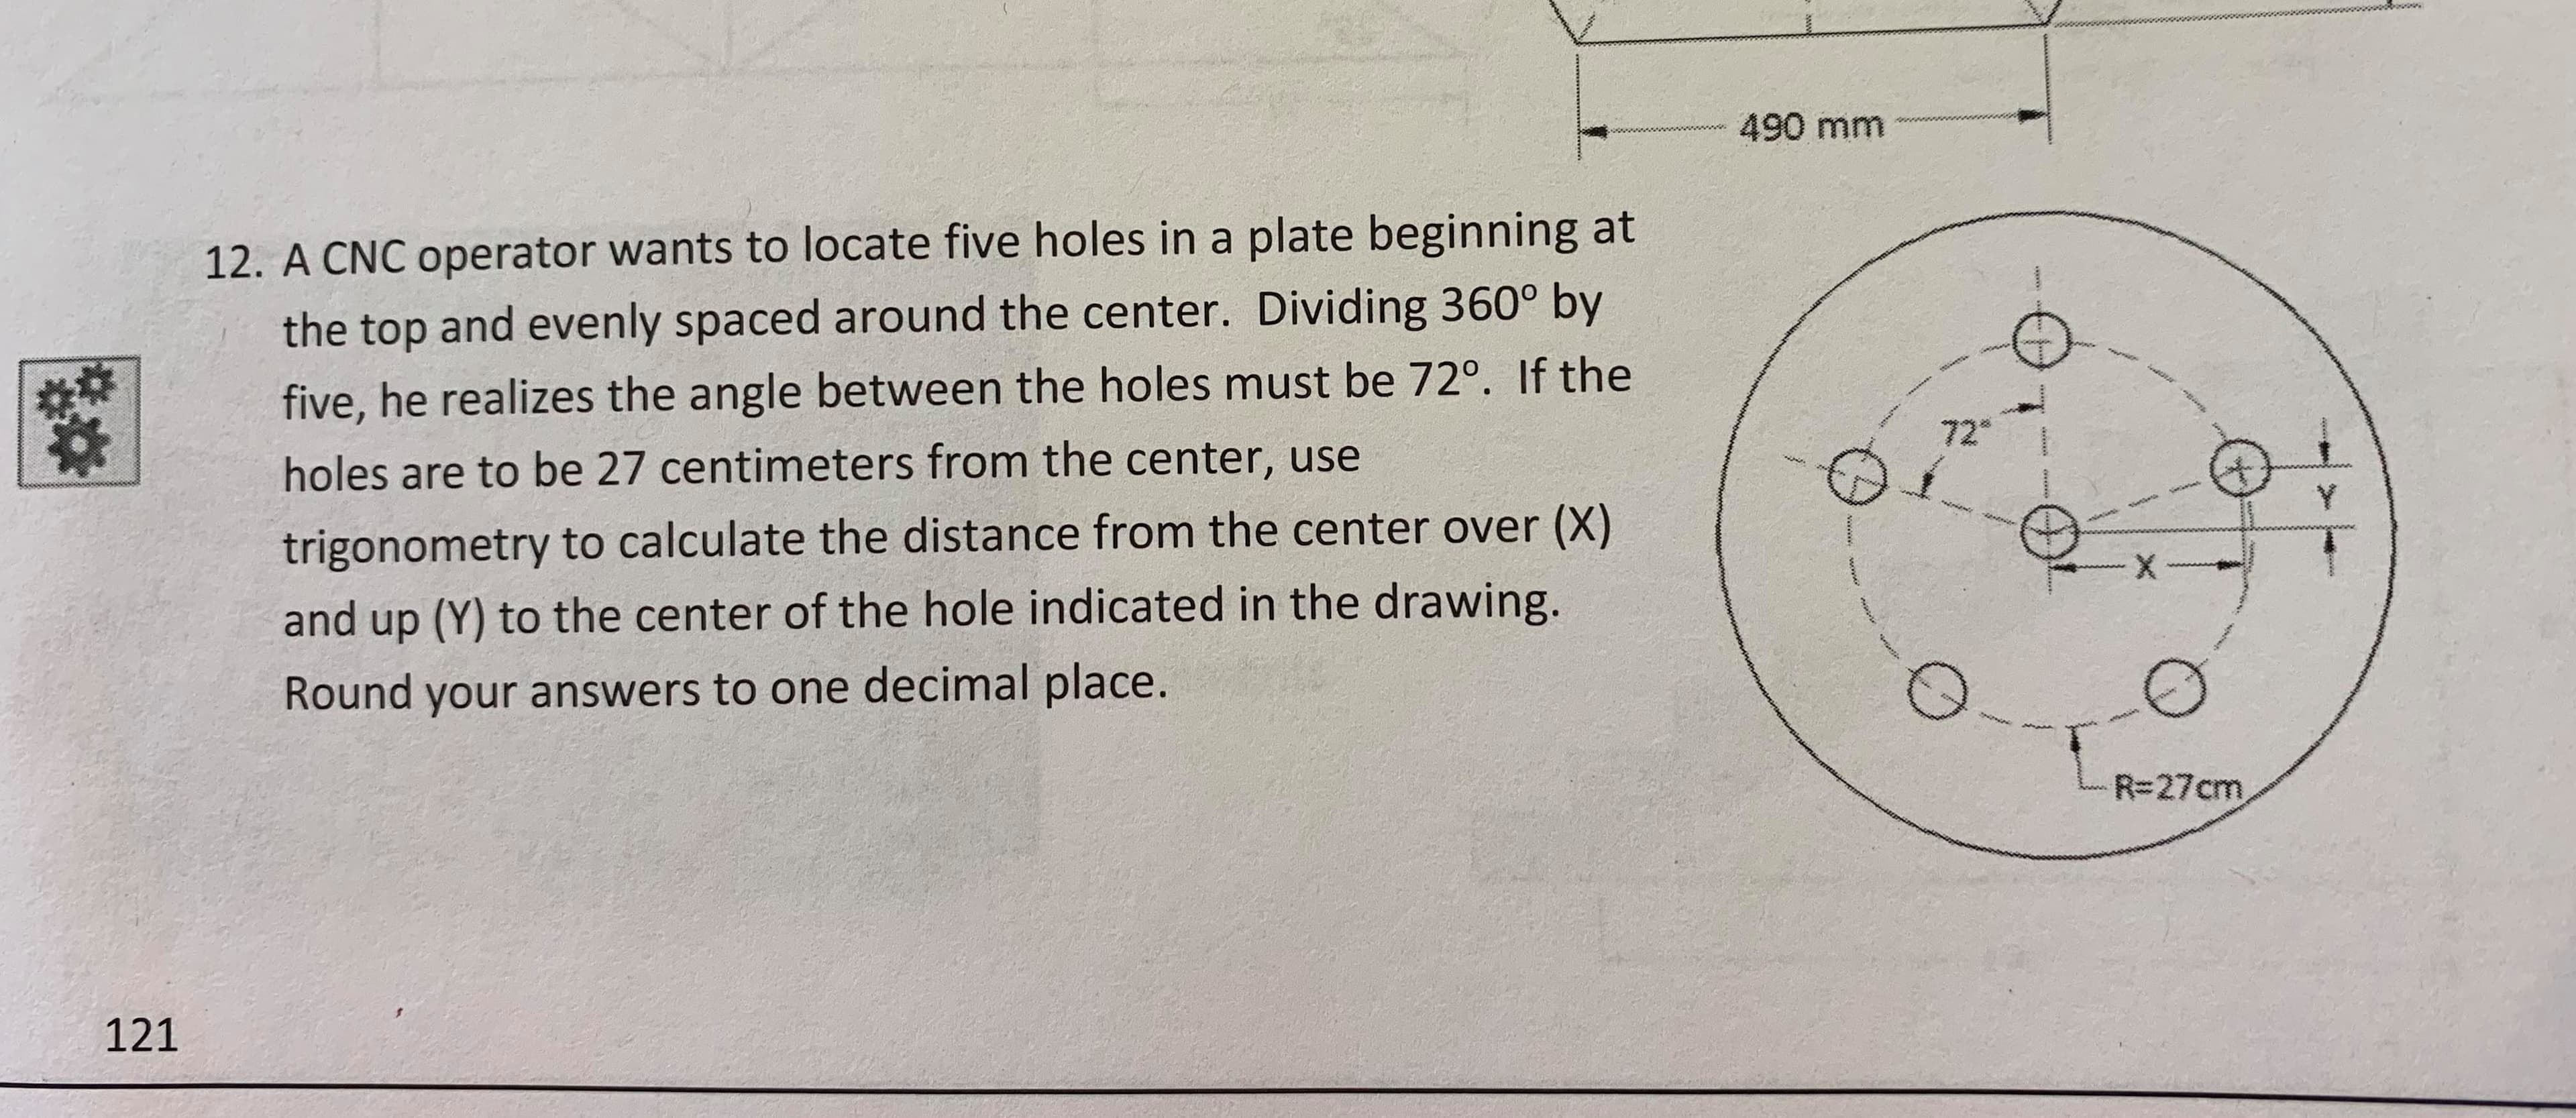 490 mm
12. A CNC operator wants to locate five holes in a plate beginning at
the top and evenly spaced around the center. Dividing 360° by
five, he realizes the angle between the holes must be 72°. If the
72
holes are to be 27 centimeters from the center, use
Y
trigonometry to calculate the distance from the center over (X)
ి
X
and up (Y) to the center of the hole indicated in the drawing.
Round your answers to one decimal place.
R-27cm
121
